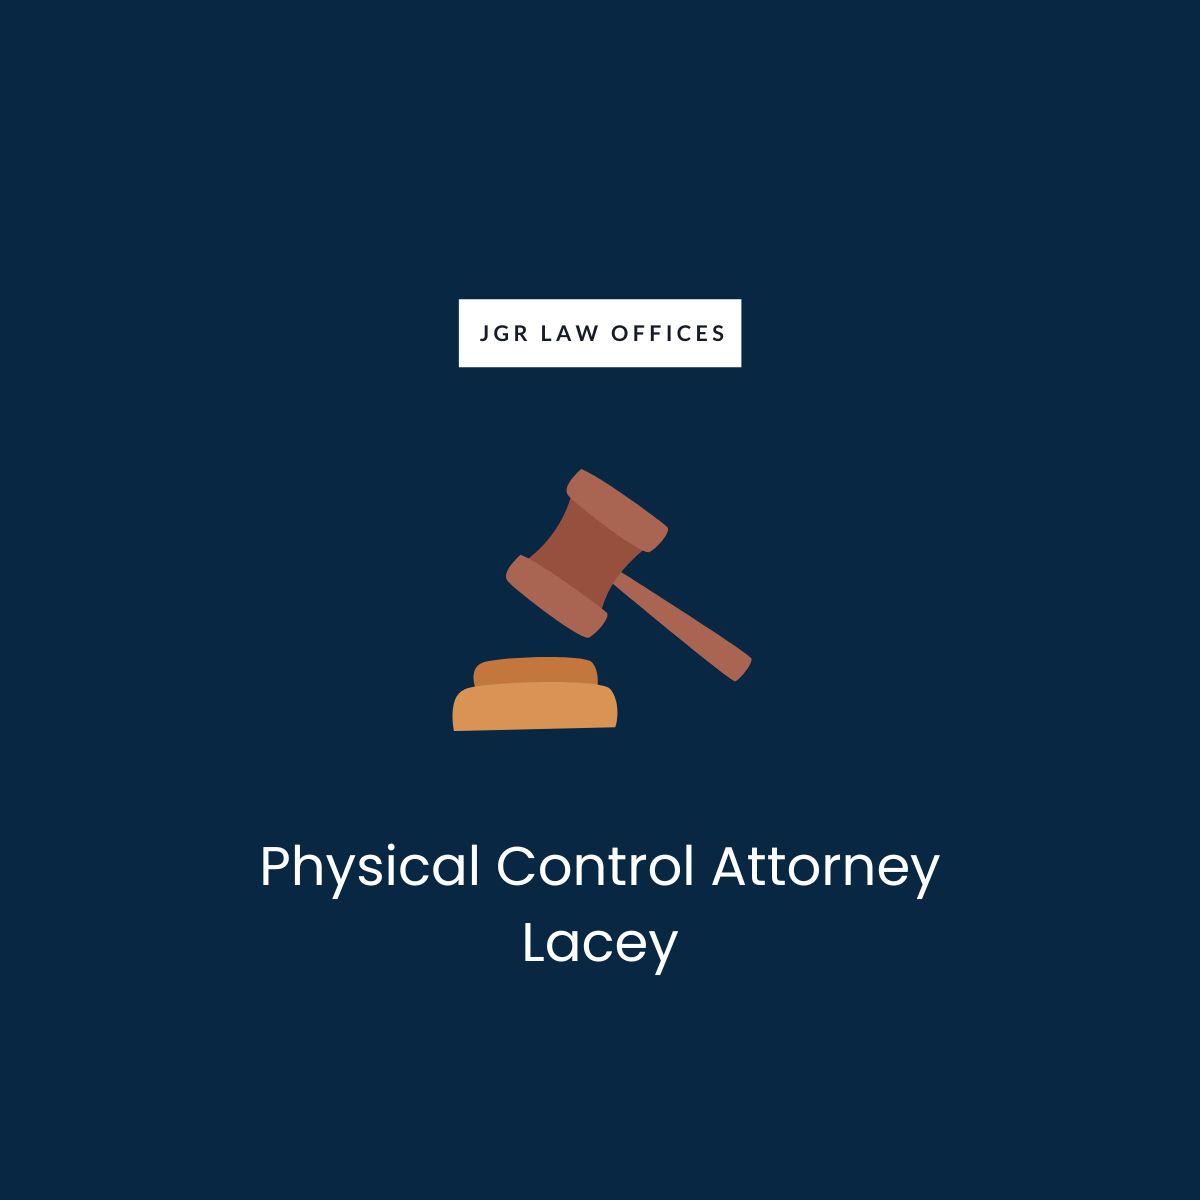 Physical Control Attorney Lacey